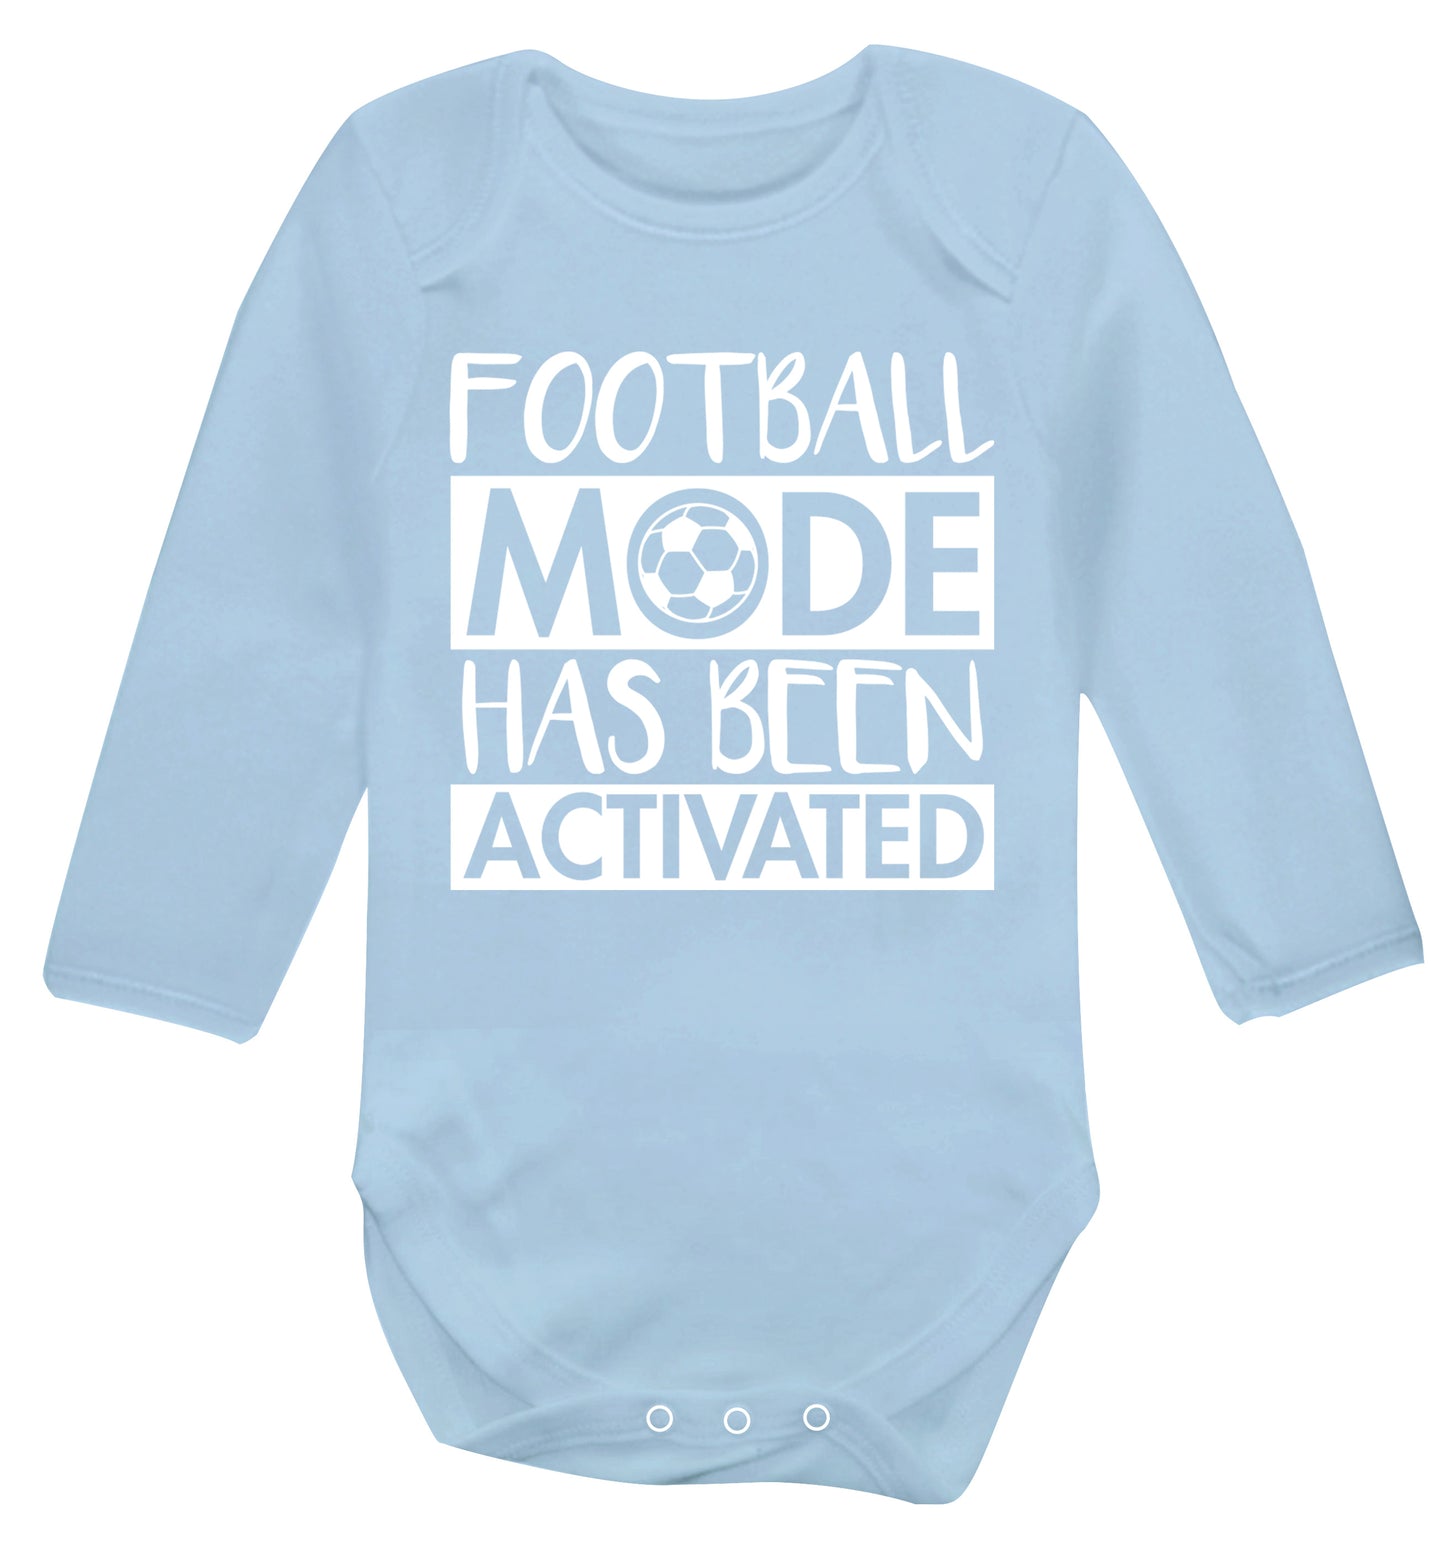 Football mode has been activated Baby Vest long sleeved pale blue 6-12 months